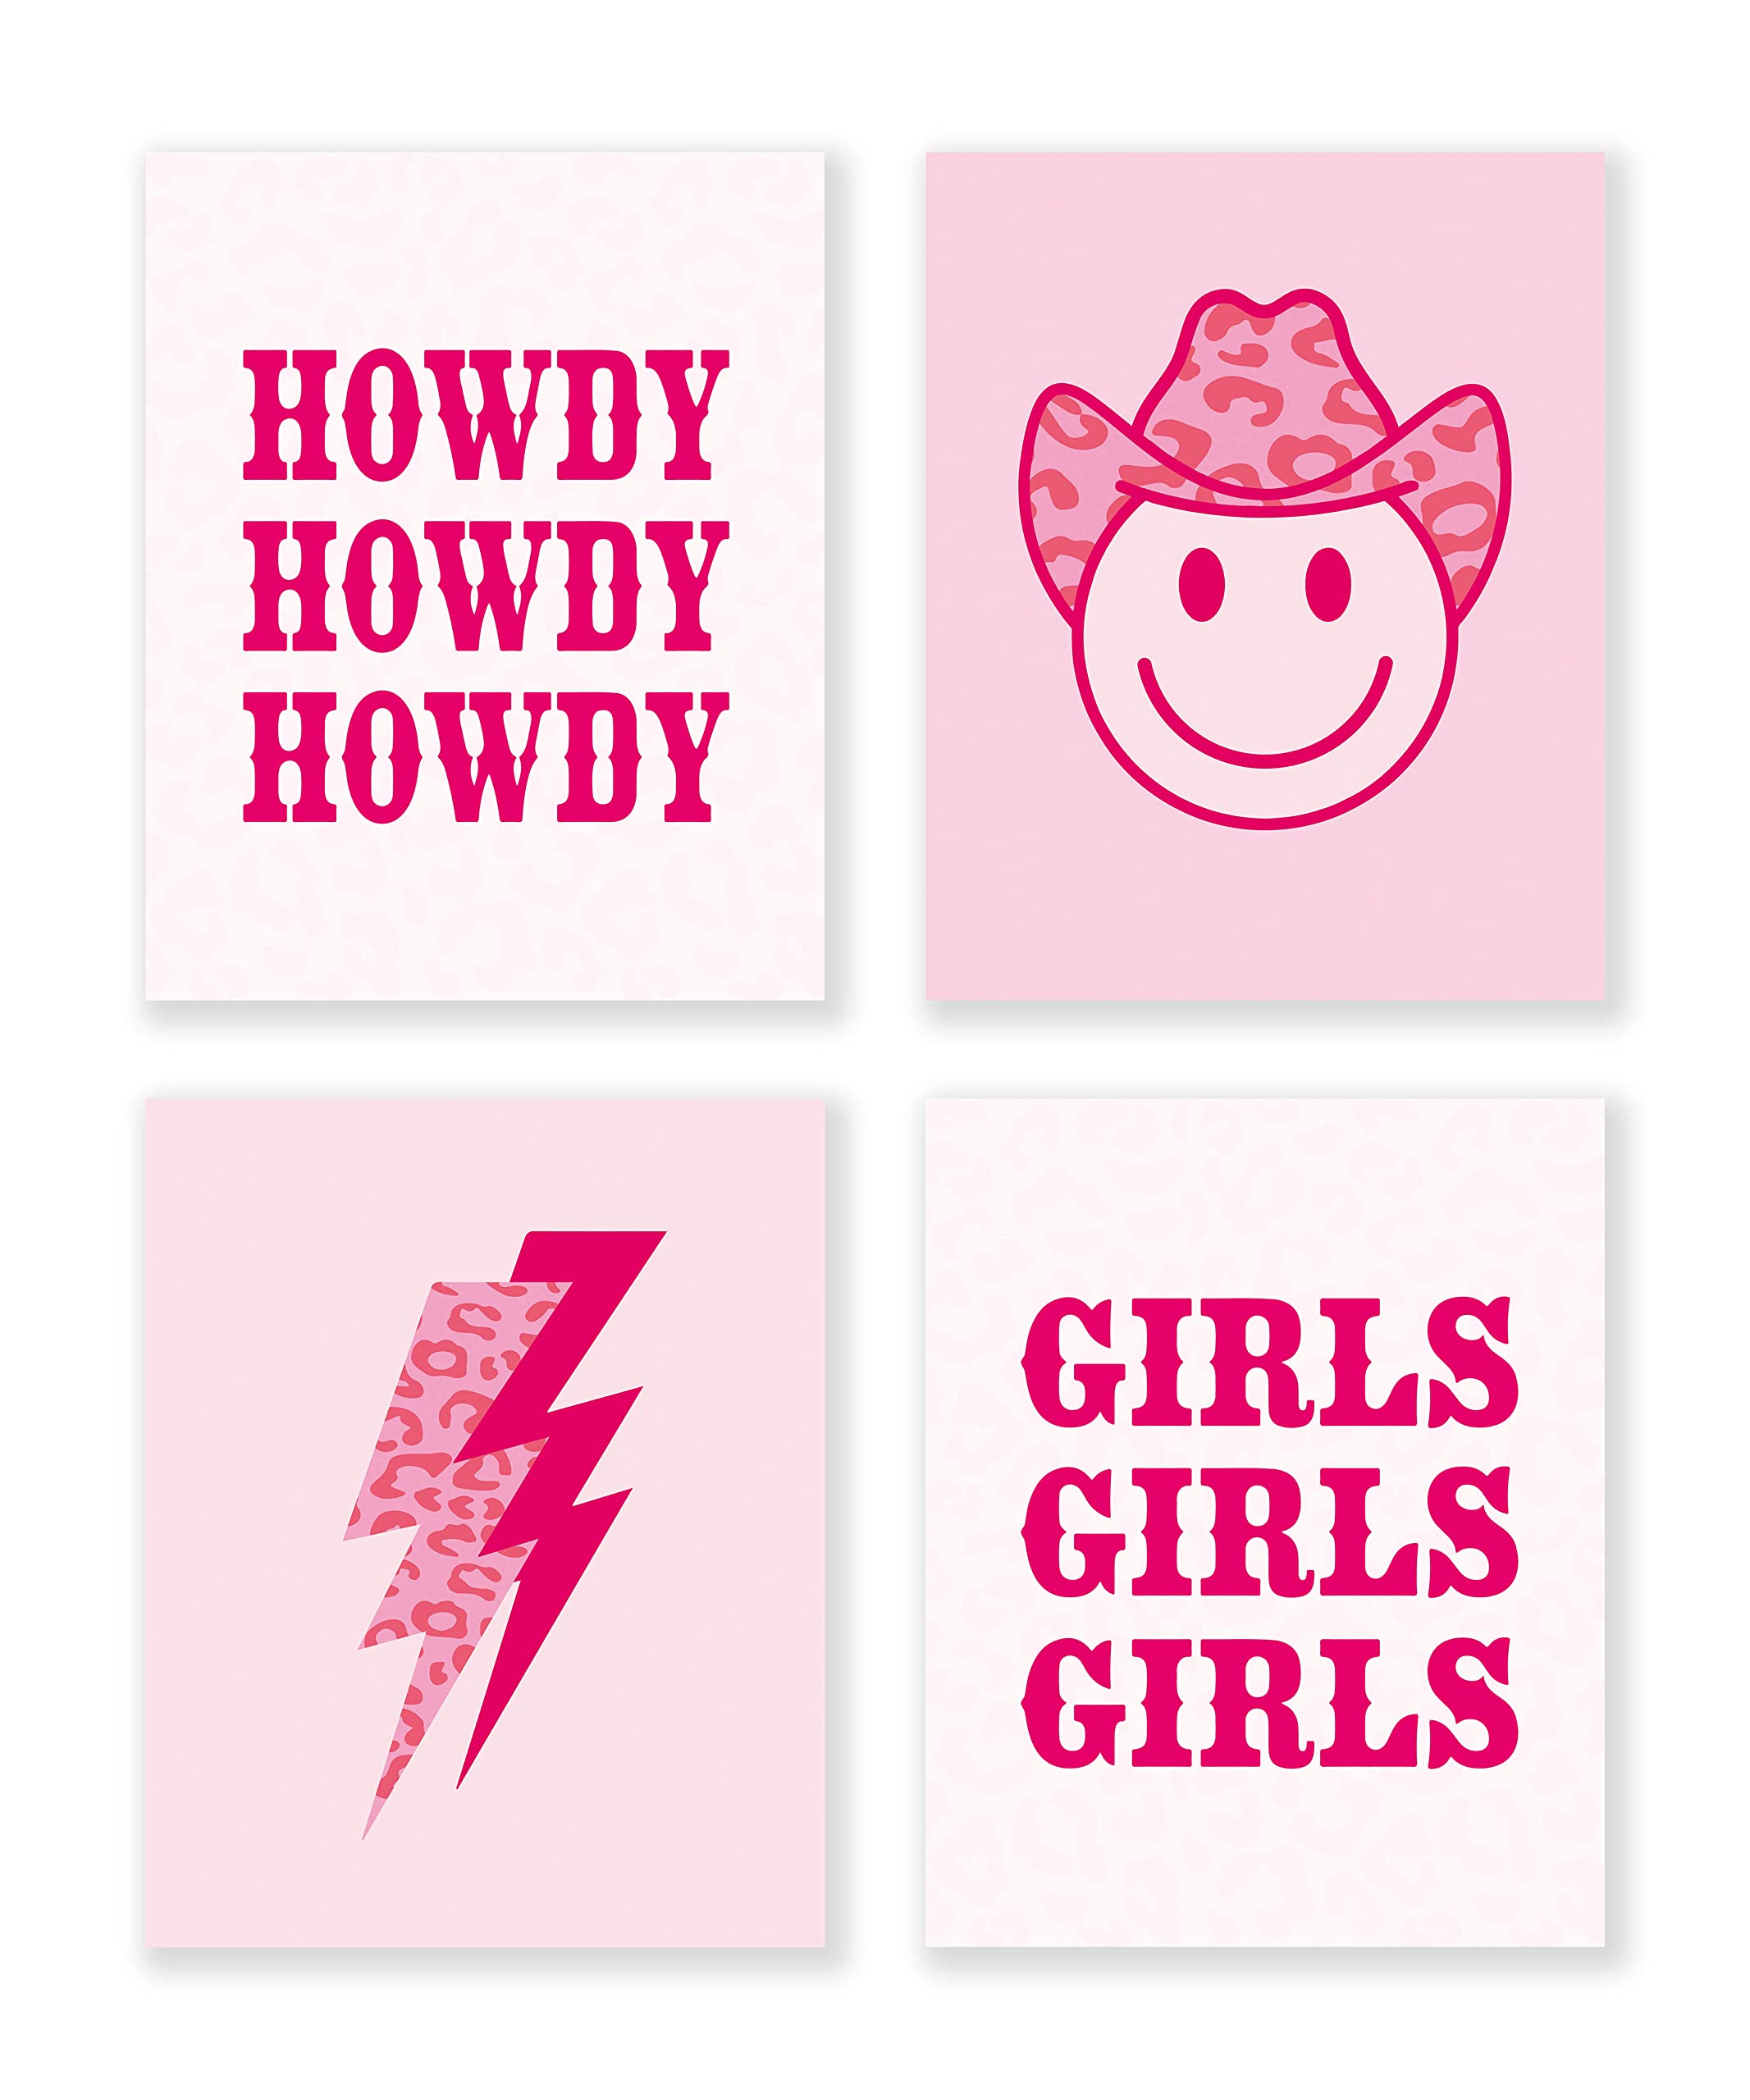 LiTiu Smiley Face Cowgirl Hat Howdy Lightning Hot Pink Preppy Wall Art Poster Prints Decor, 8”x10”Set Of Preppy Artwork Teen Girls Gifts For Bachelorette Party, Decorations For Girls Room: Posters